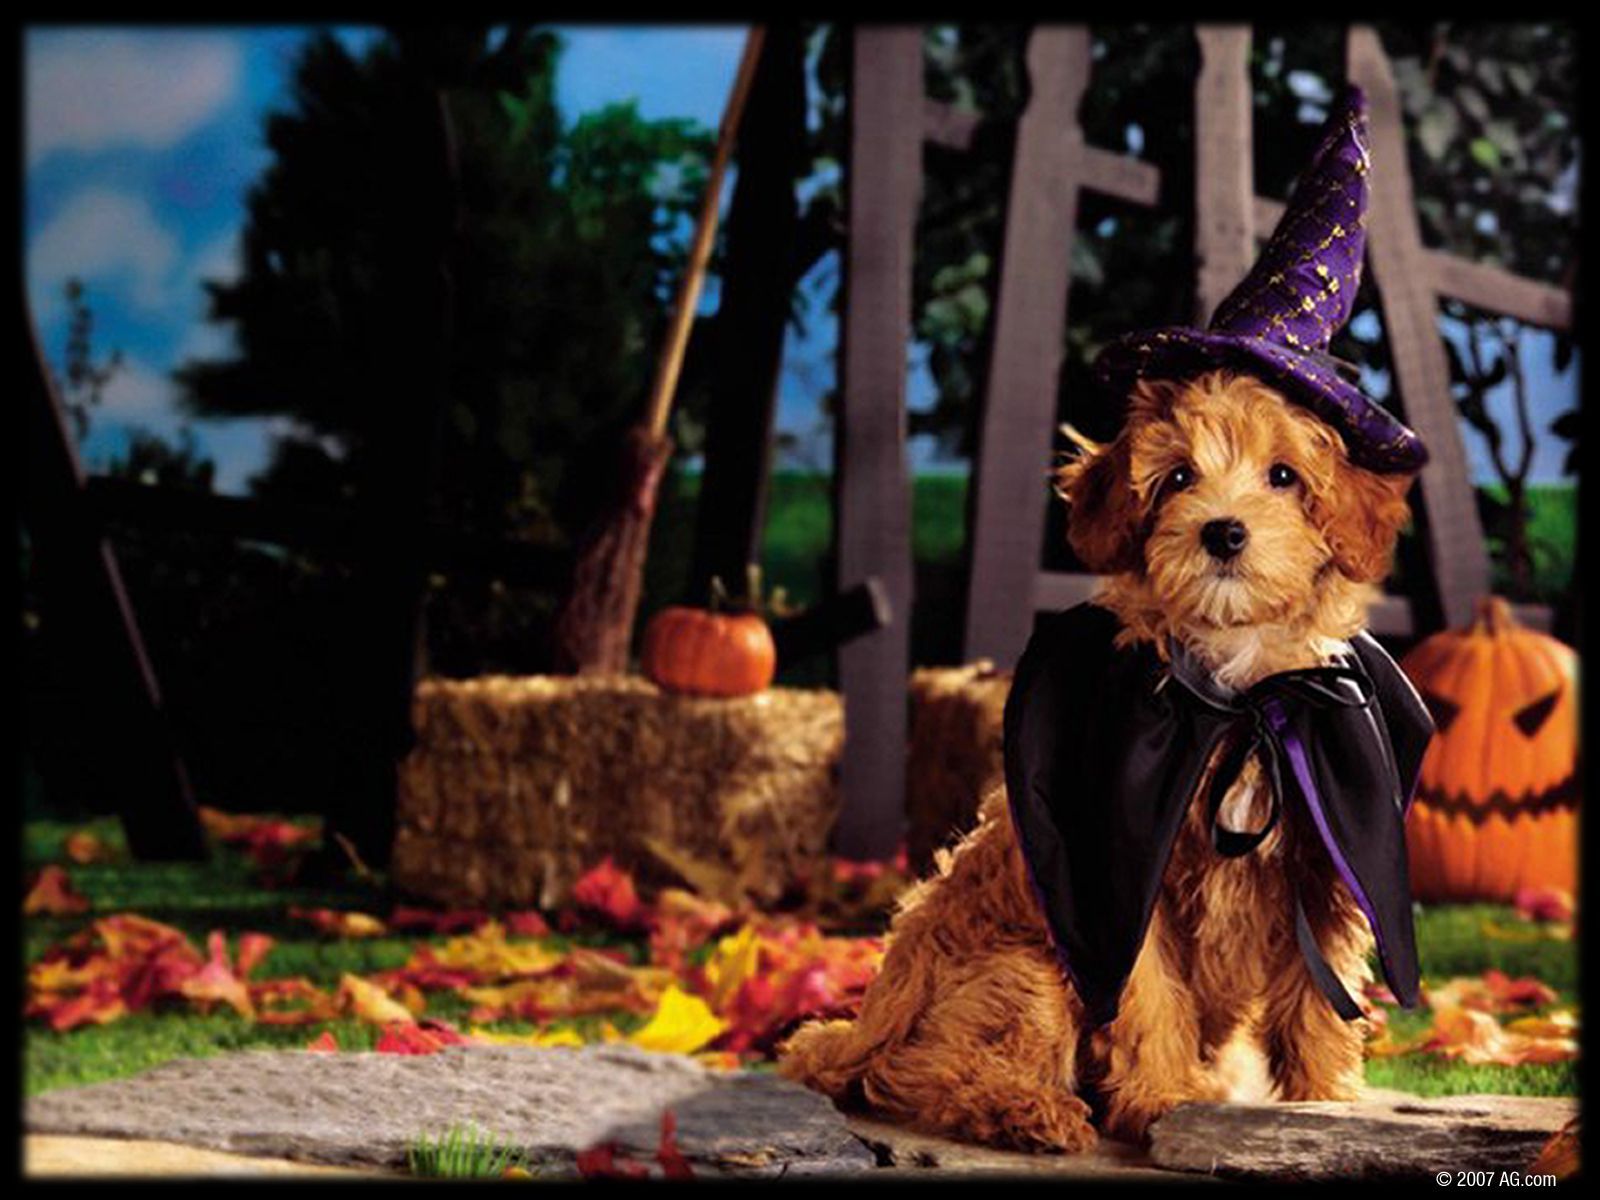 Cute Halloween Dogs Wallpapers - Wallpaper Cave